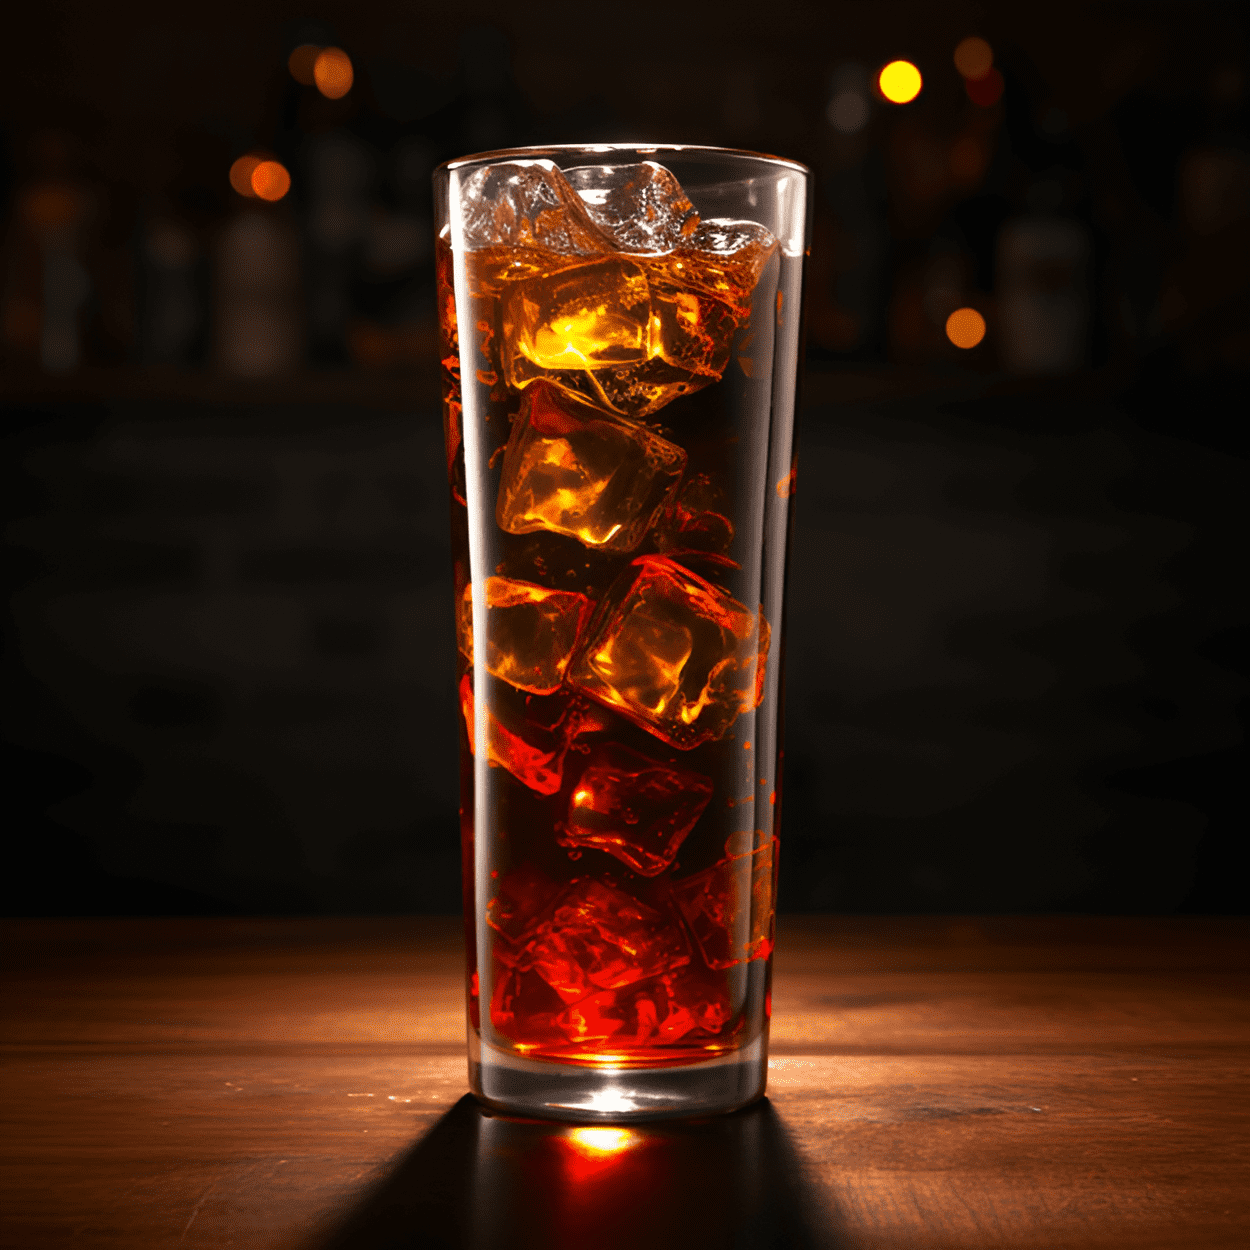 Jager Bomb Cocktail Recipe - The Jager Bomb has a unique, sweet and herbal flavor. The Jagermeister provides a complex, herbal taste, while the Red Bull adds a sweet, fruity flavor. The combination results in a strong, energizing drink with a slightly bitter aftertaste.